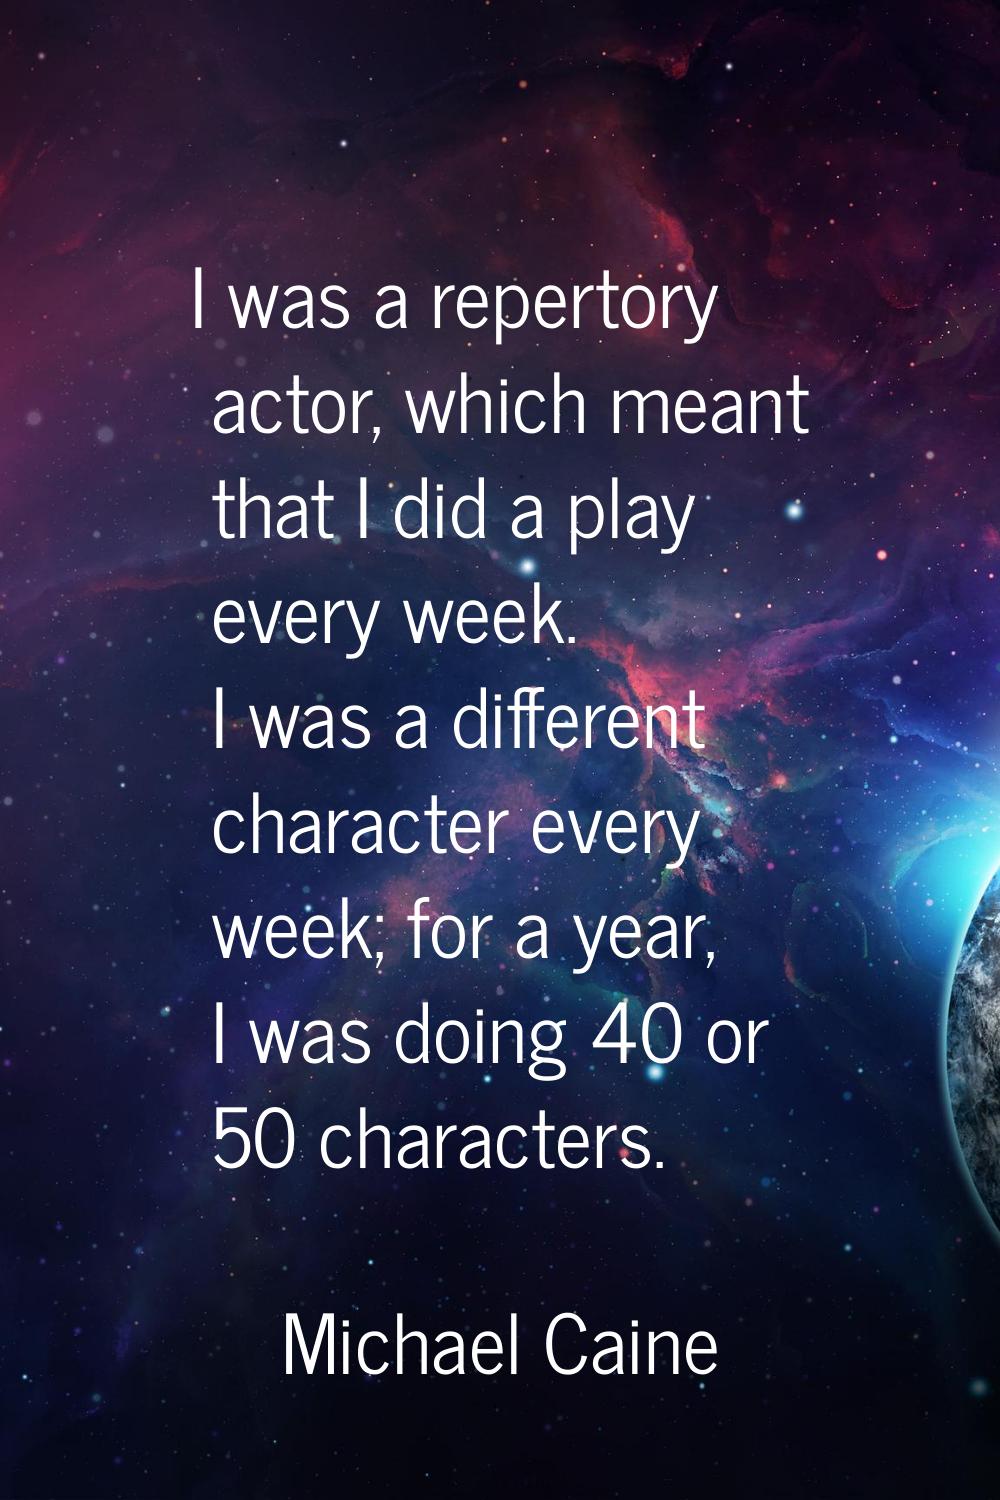 I was a repertory actor, which meant that I did a play every week. I was a different character ever